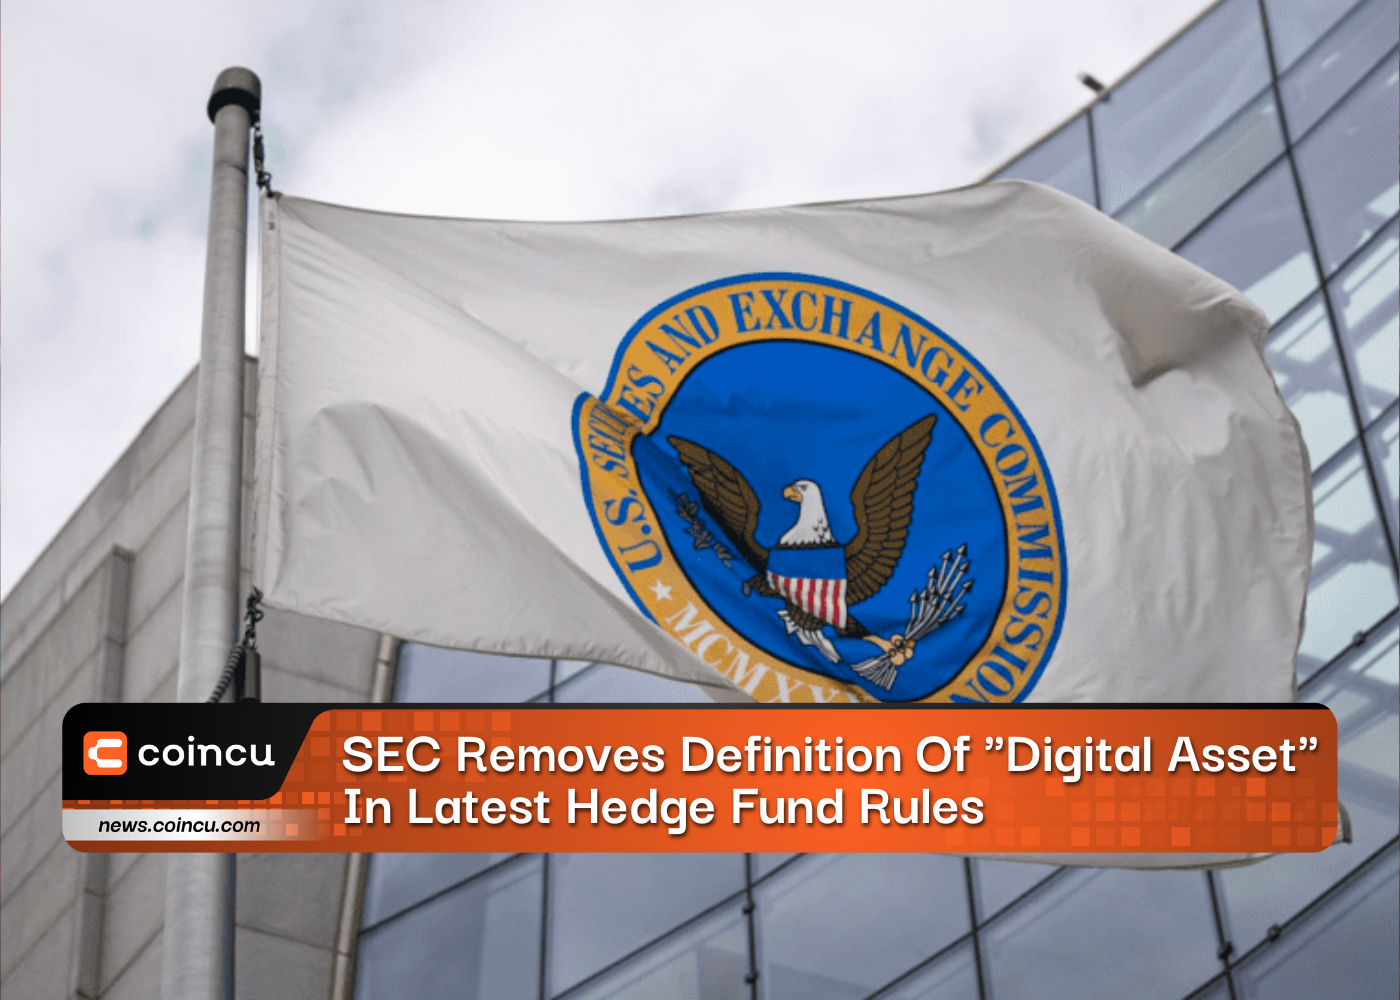 SEC Removes Definition Of "Digital Asset" In Latest Hedge Fund Rules